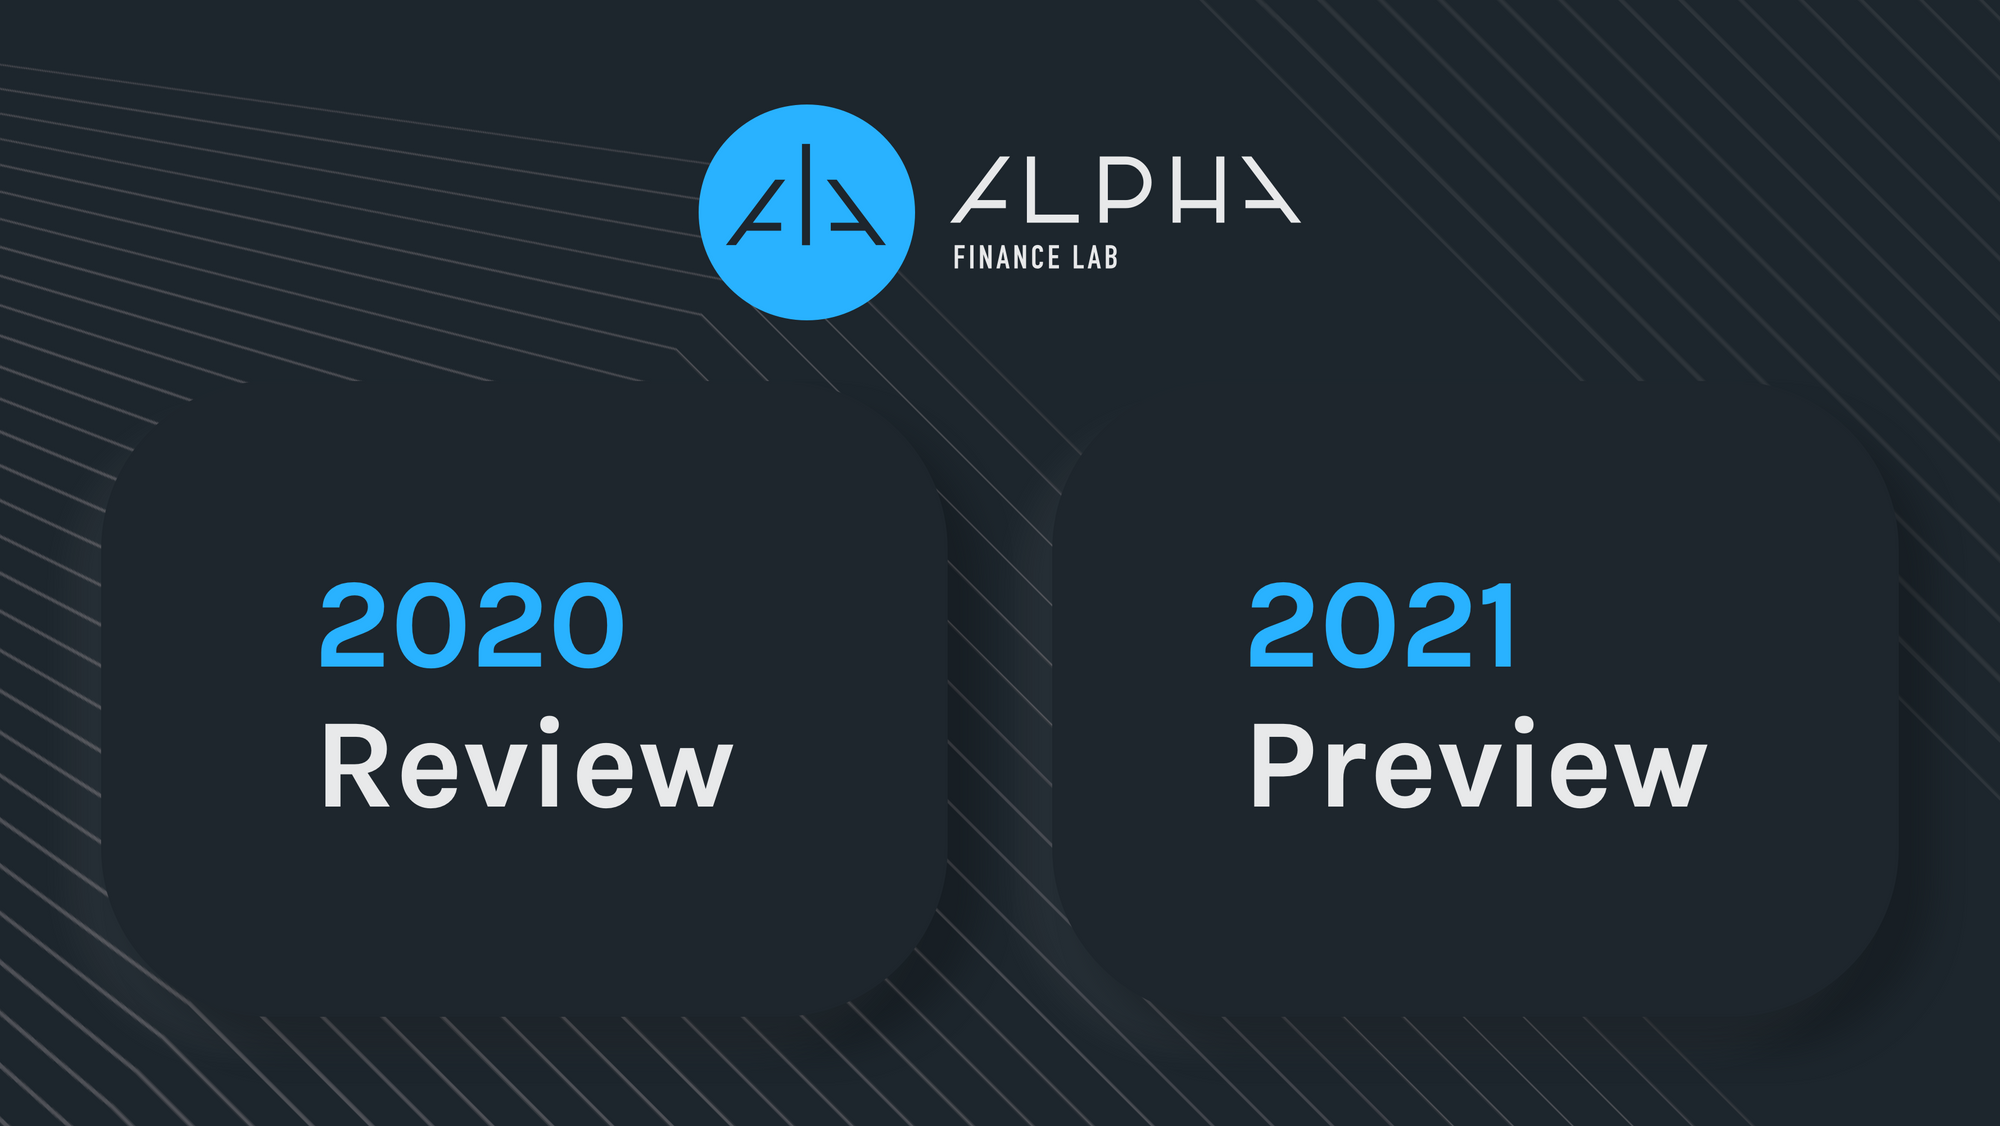 Alpha Finance Lab 2020 Review and 2021 Preview